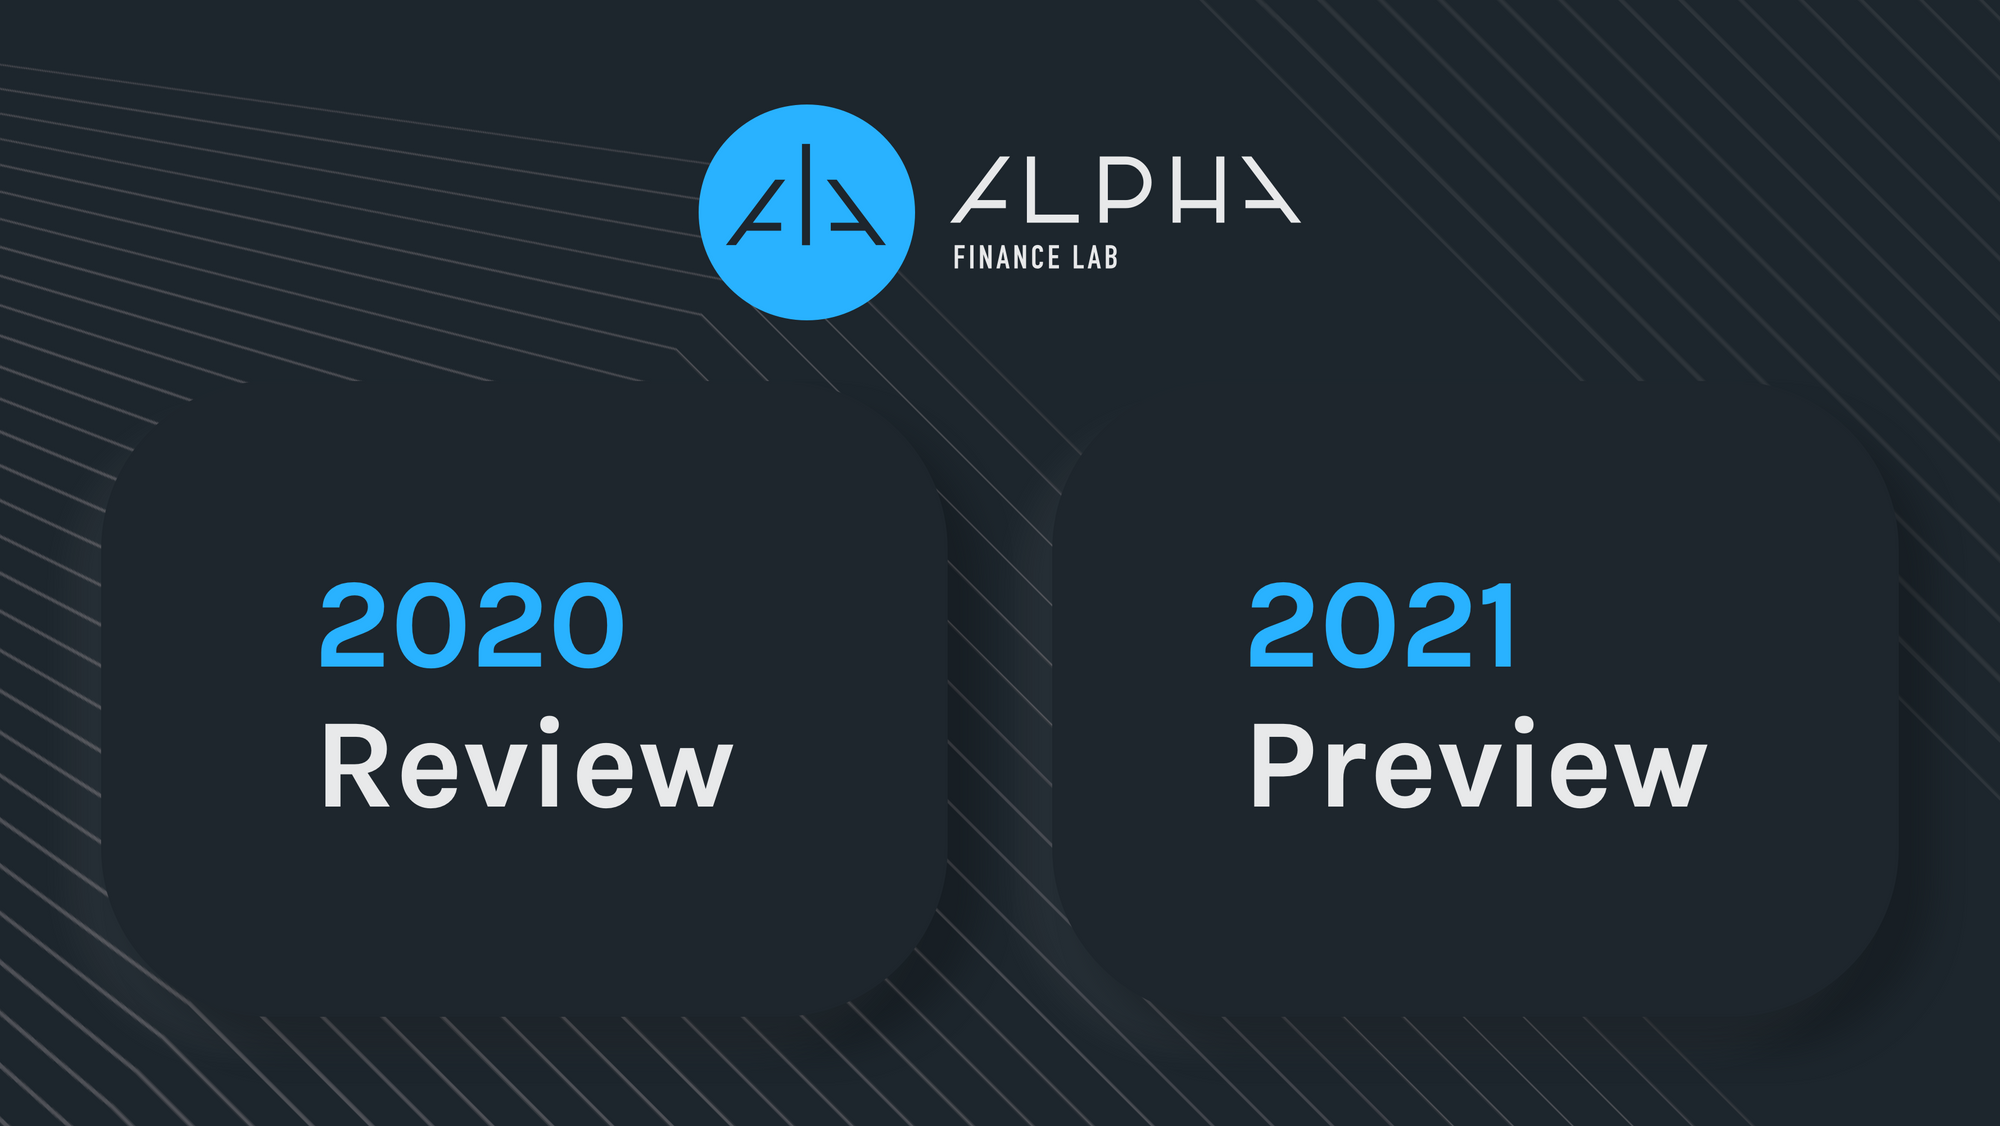 Alpha Finance Lab 2020 Review and 2021 Preview